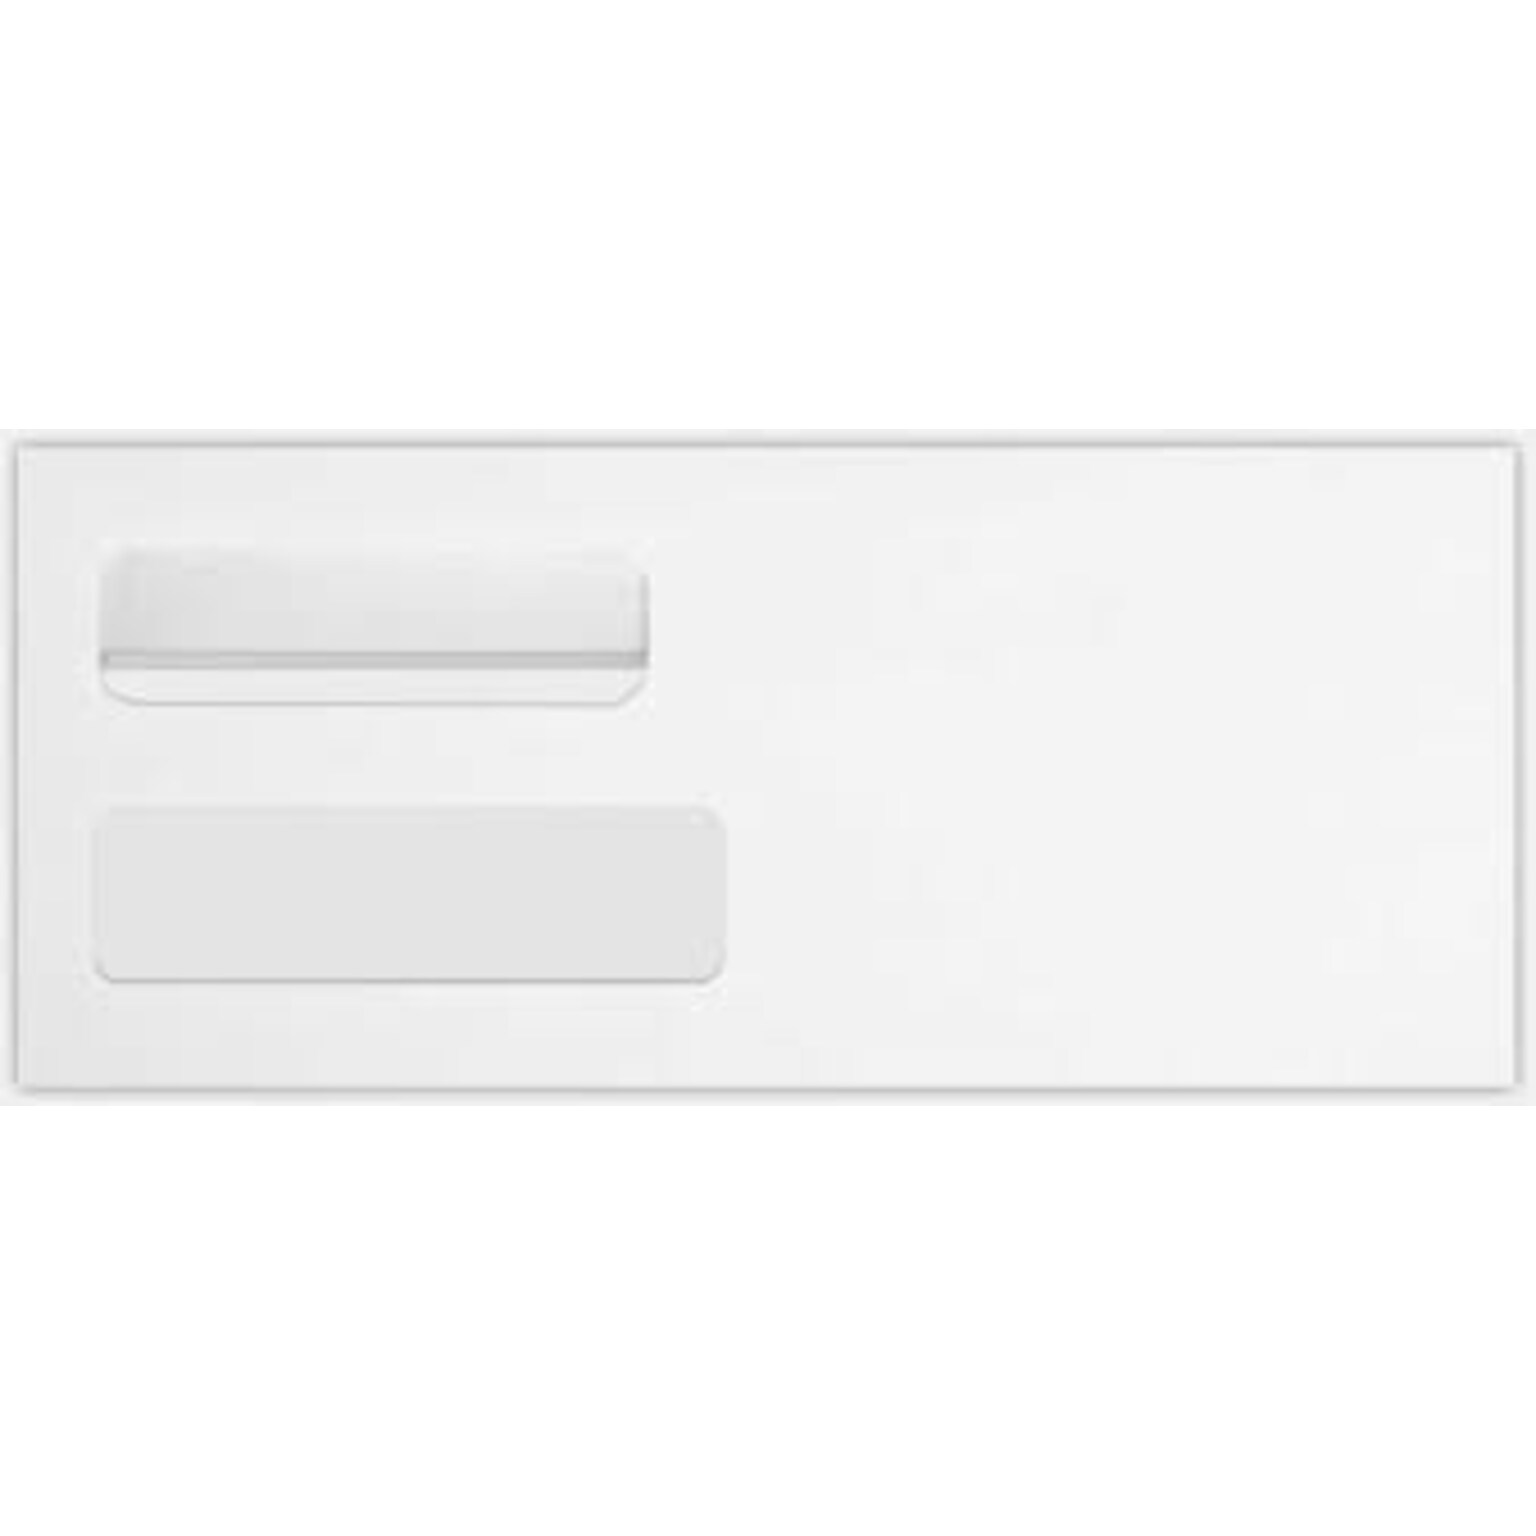 Quality Park Redi-Seal Self Seal #10 Double Window Envelope, 4 1/2 x 9 1/2, White Wove, 500/Pack (24559-QP-500)